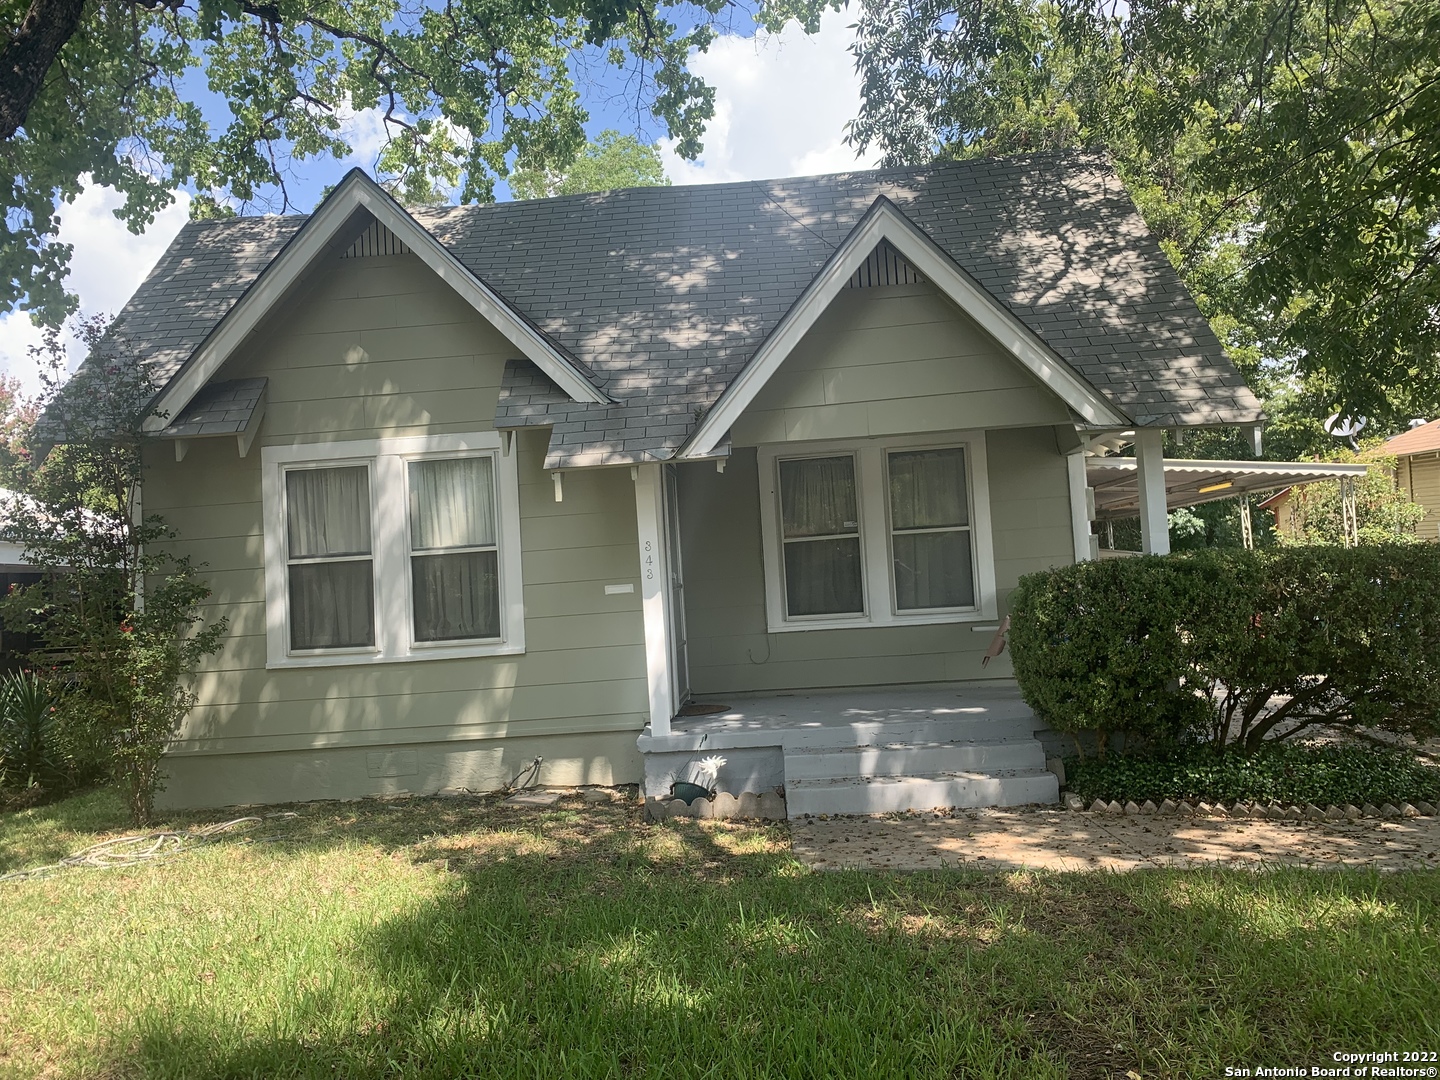 Beautiful & cozy craftsmen style home in Palm Heights neighborhood. Easy access from Nogalitos or S. Zarzamora.     Hardwood floors, large kitchen, large backyard with shade trees, nice front porch with shady pecan trees.